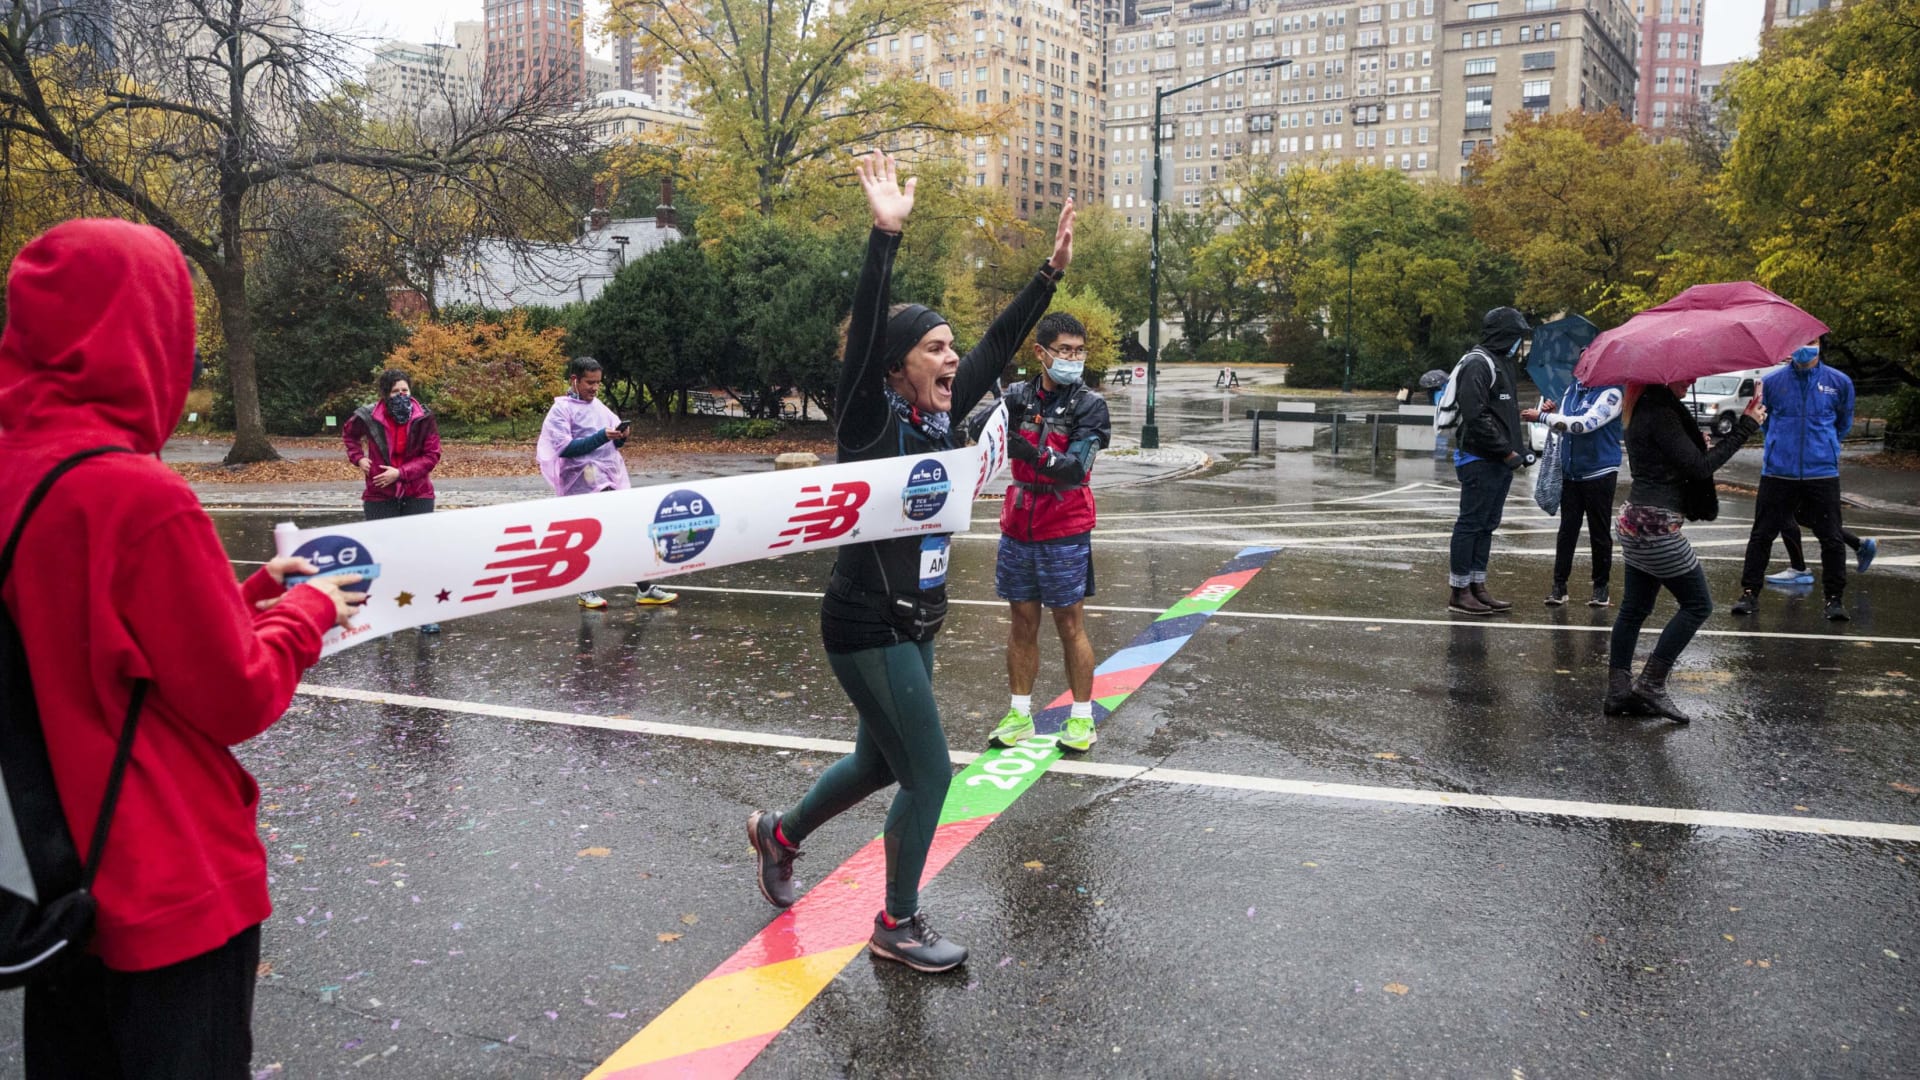 A touch of realism is added wi​th a tape across what would ha​ve been, if not for its cancel​lation, the Central Park finish line of the​ 2020 New York City Marathon.